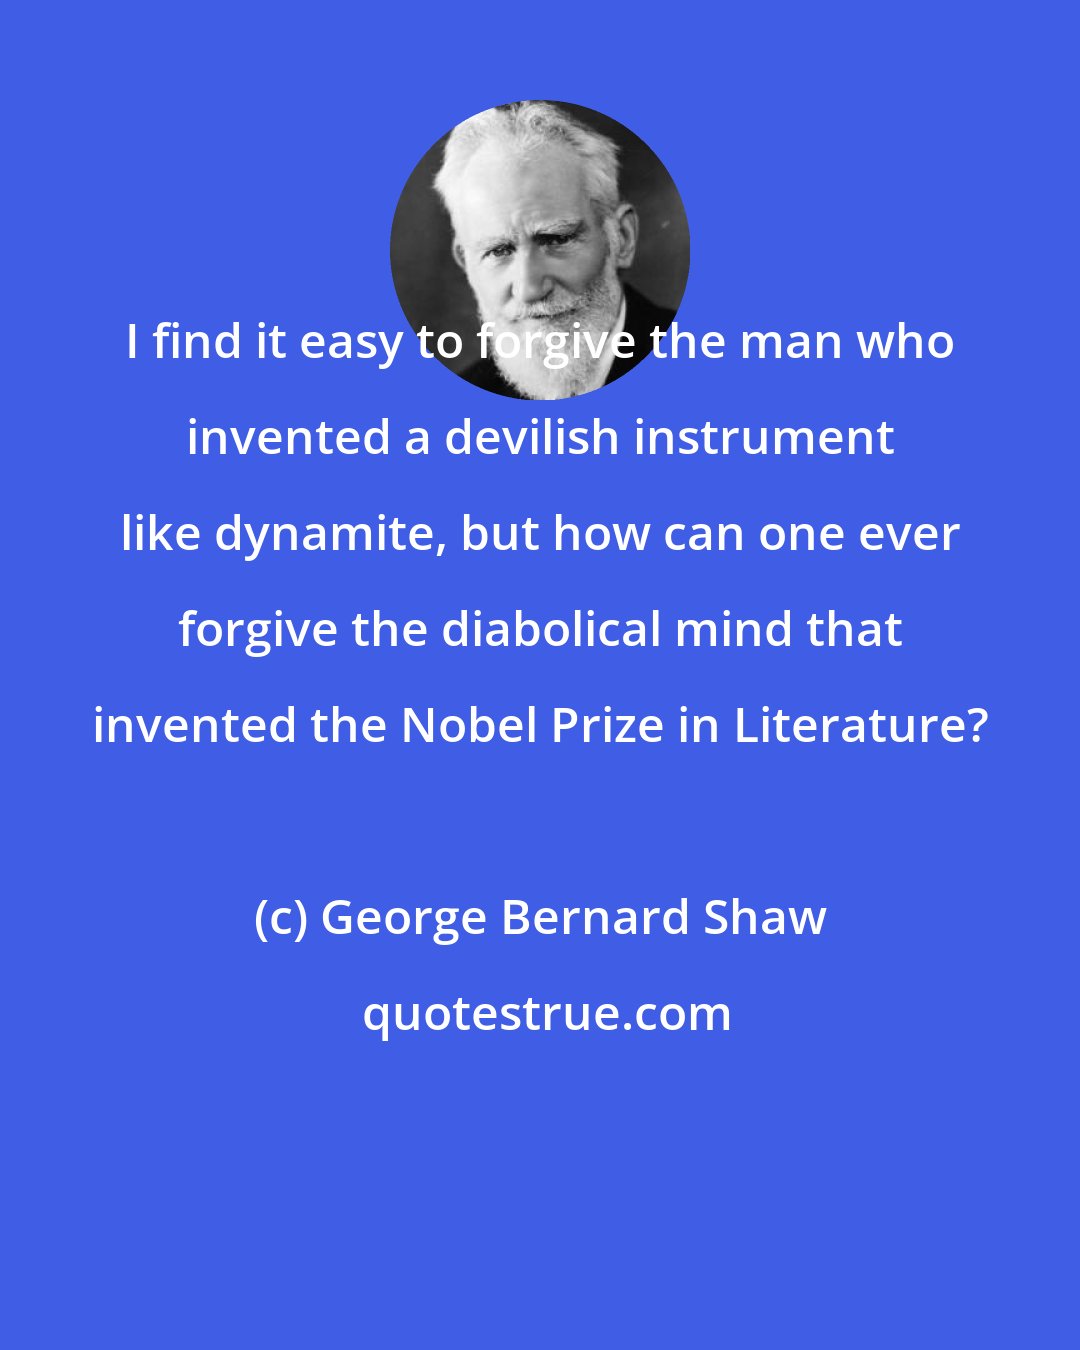 George Bernard Shaw: I find it easy to forgive the man who invented a devilish instrument like dynamite, but how can one ever forgive the diabolical mind that invented the Nobel Prize in Literature?